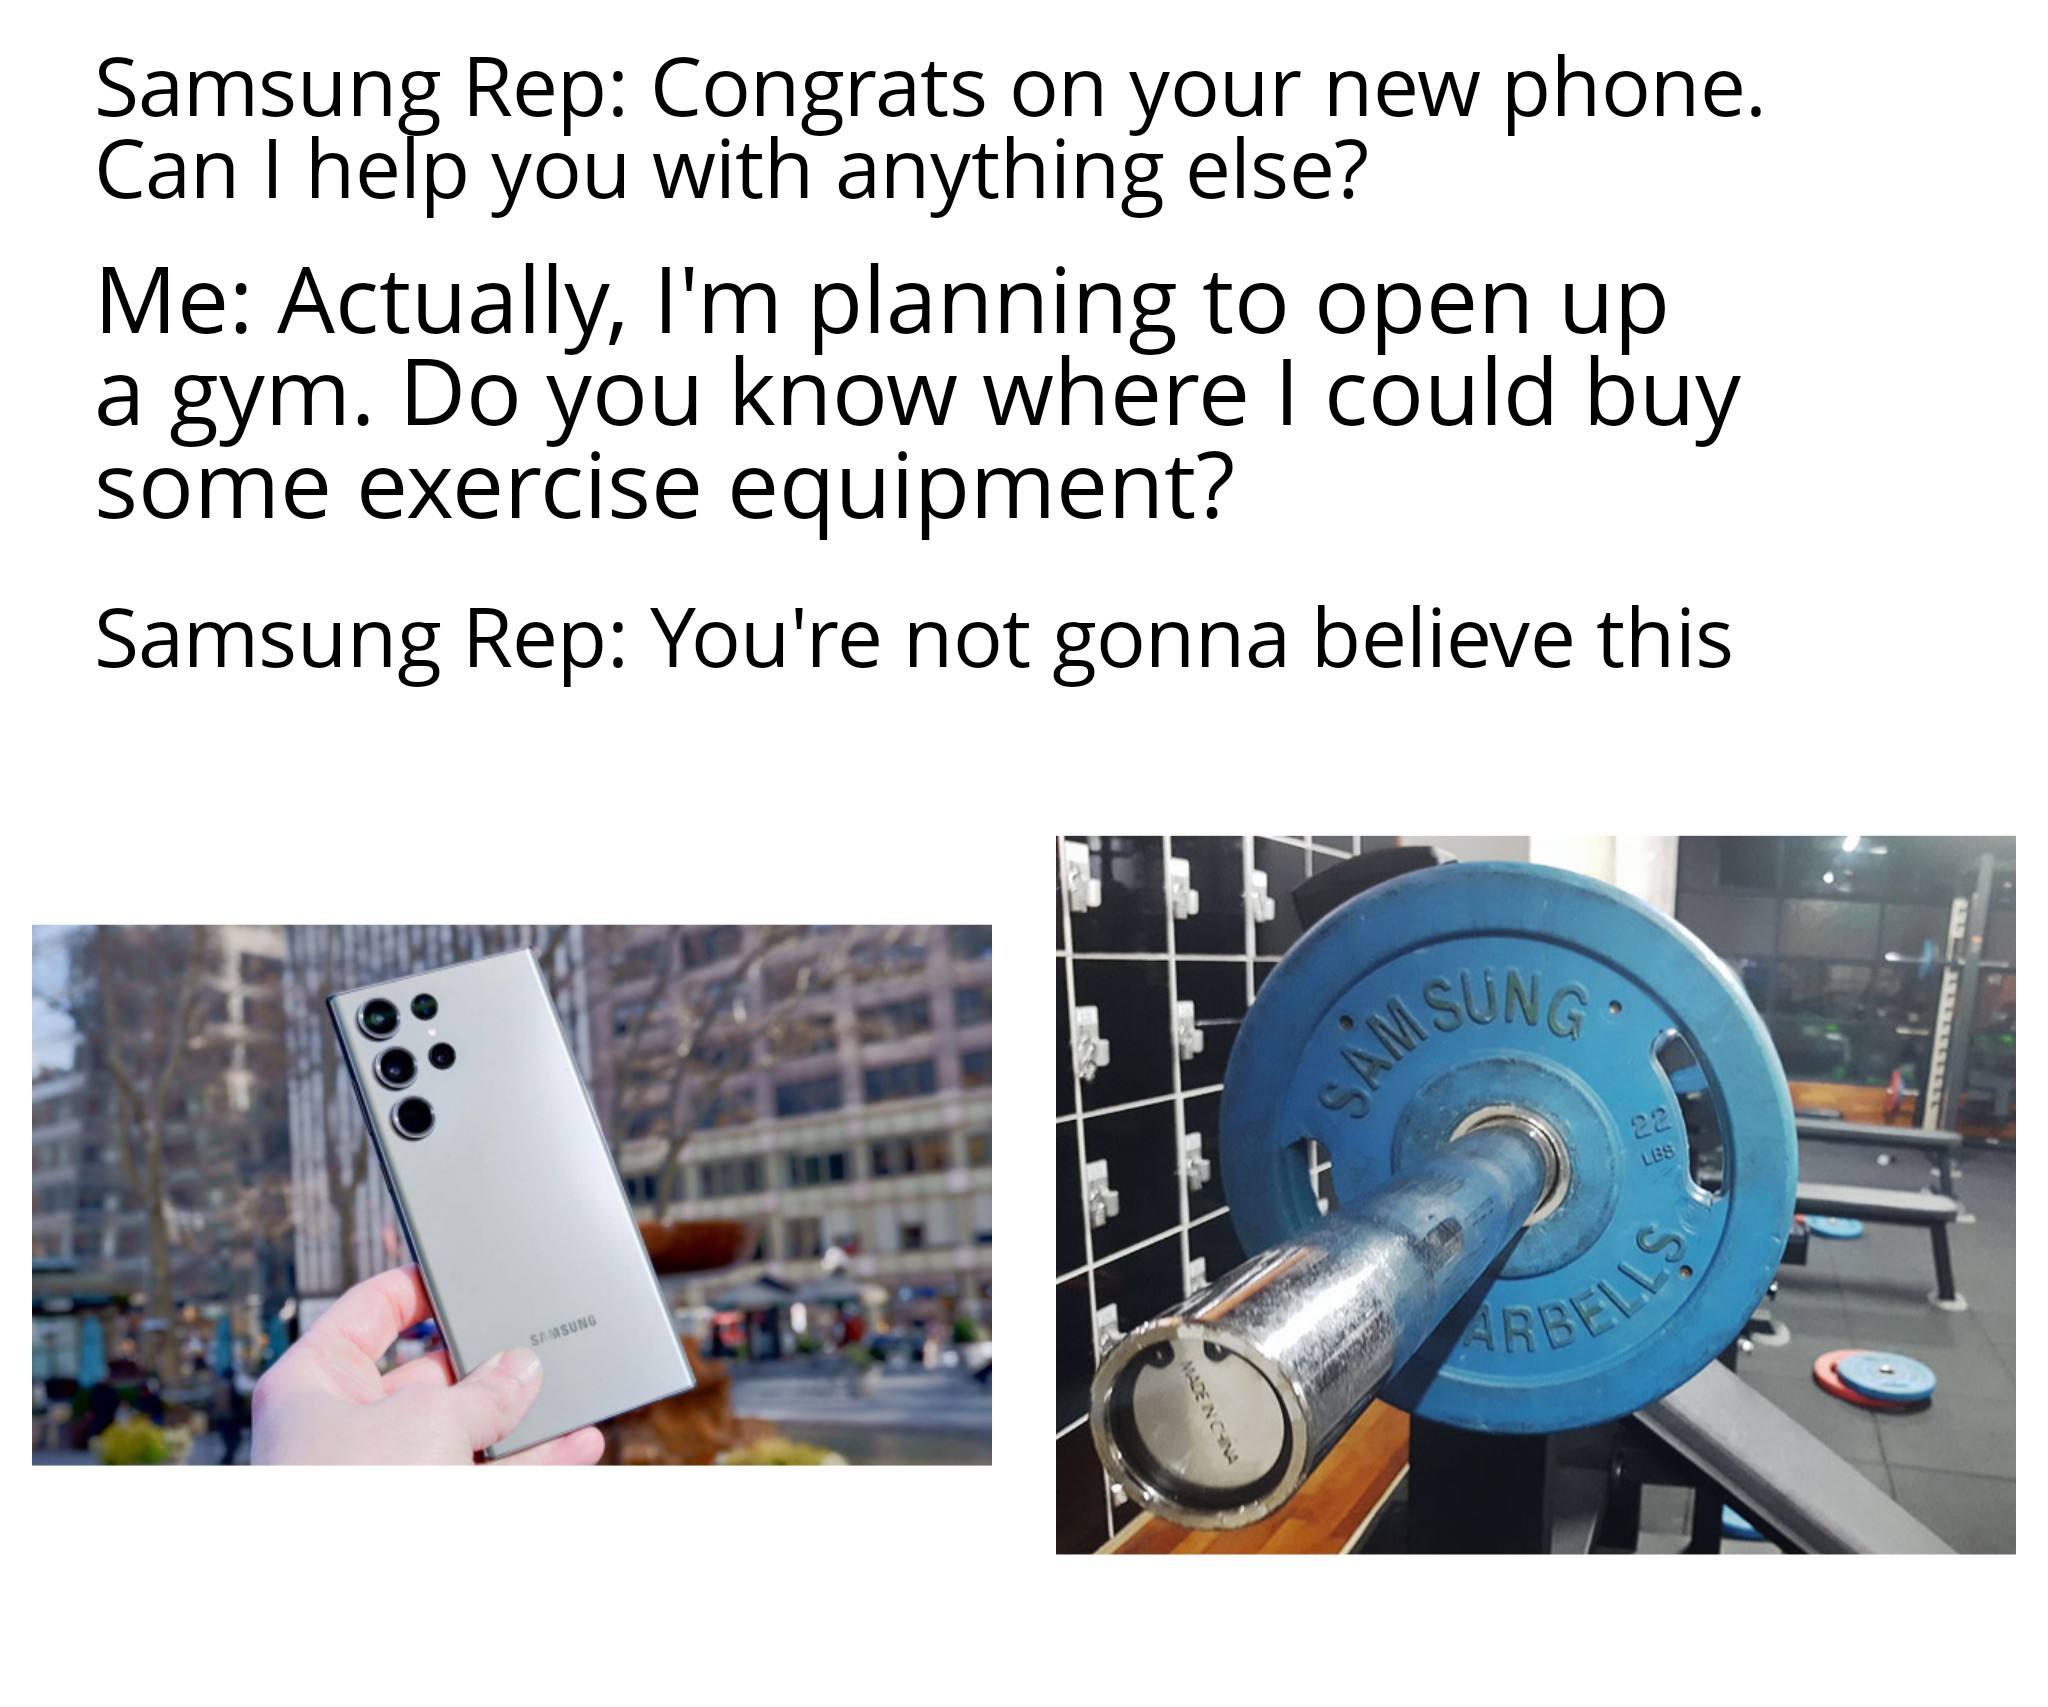 dank memes - engineering - Samsung Rep Congrats on your new phone. Can I help you with anything else? Me Actually, I'm planning to open up a gym. Do you know where I could buy some exercise equipment? Samsung Rep You're not gonna believe this Samsung Sung